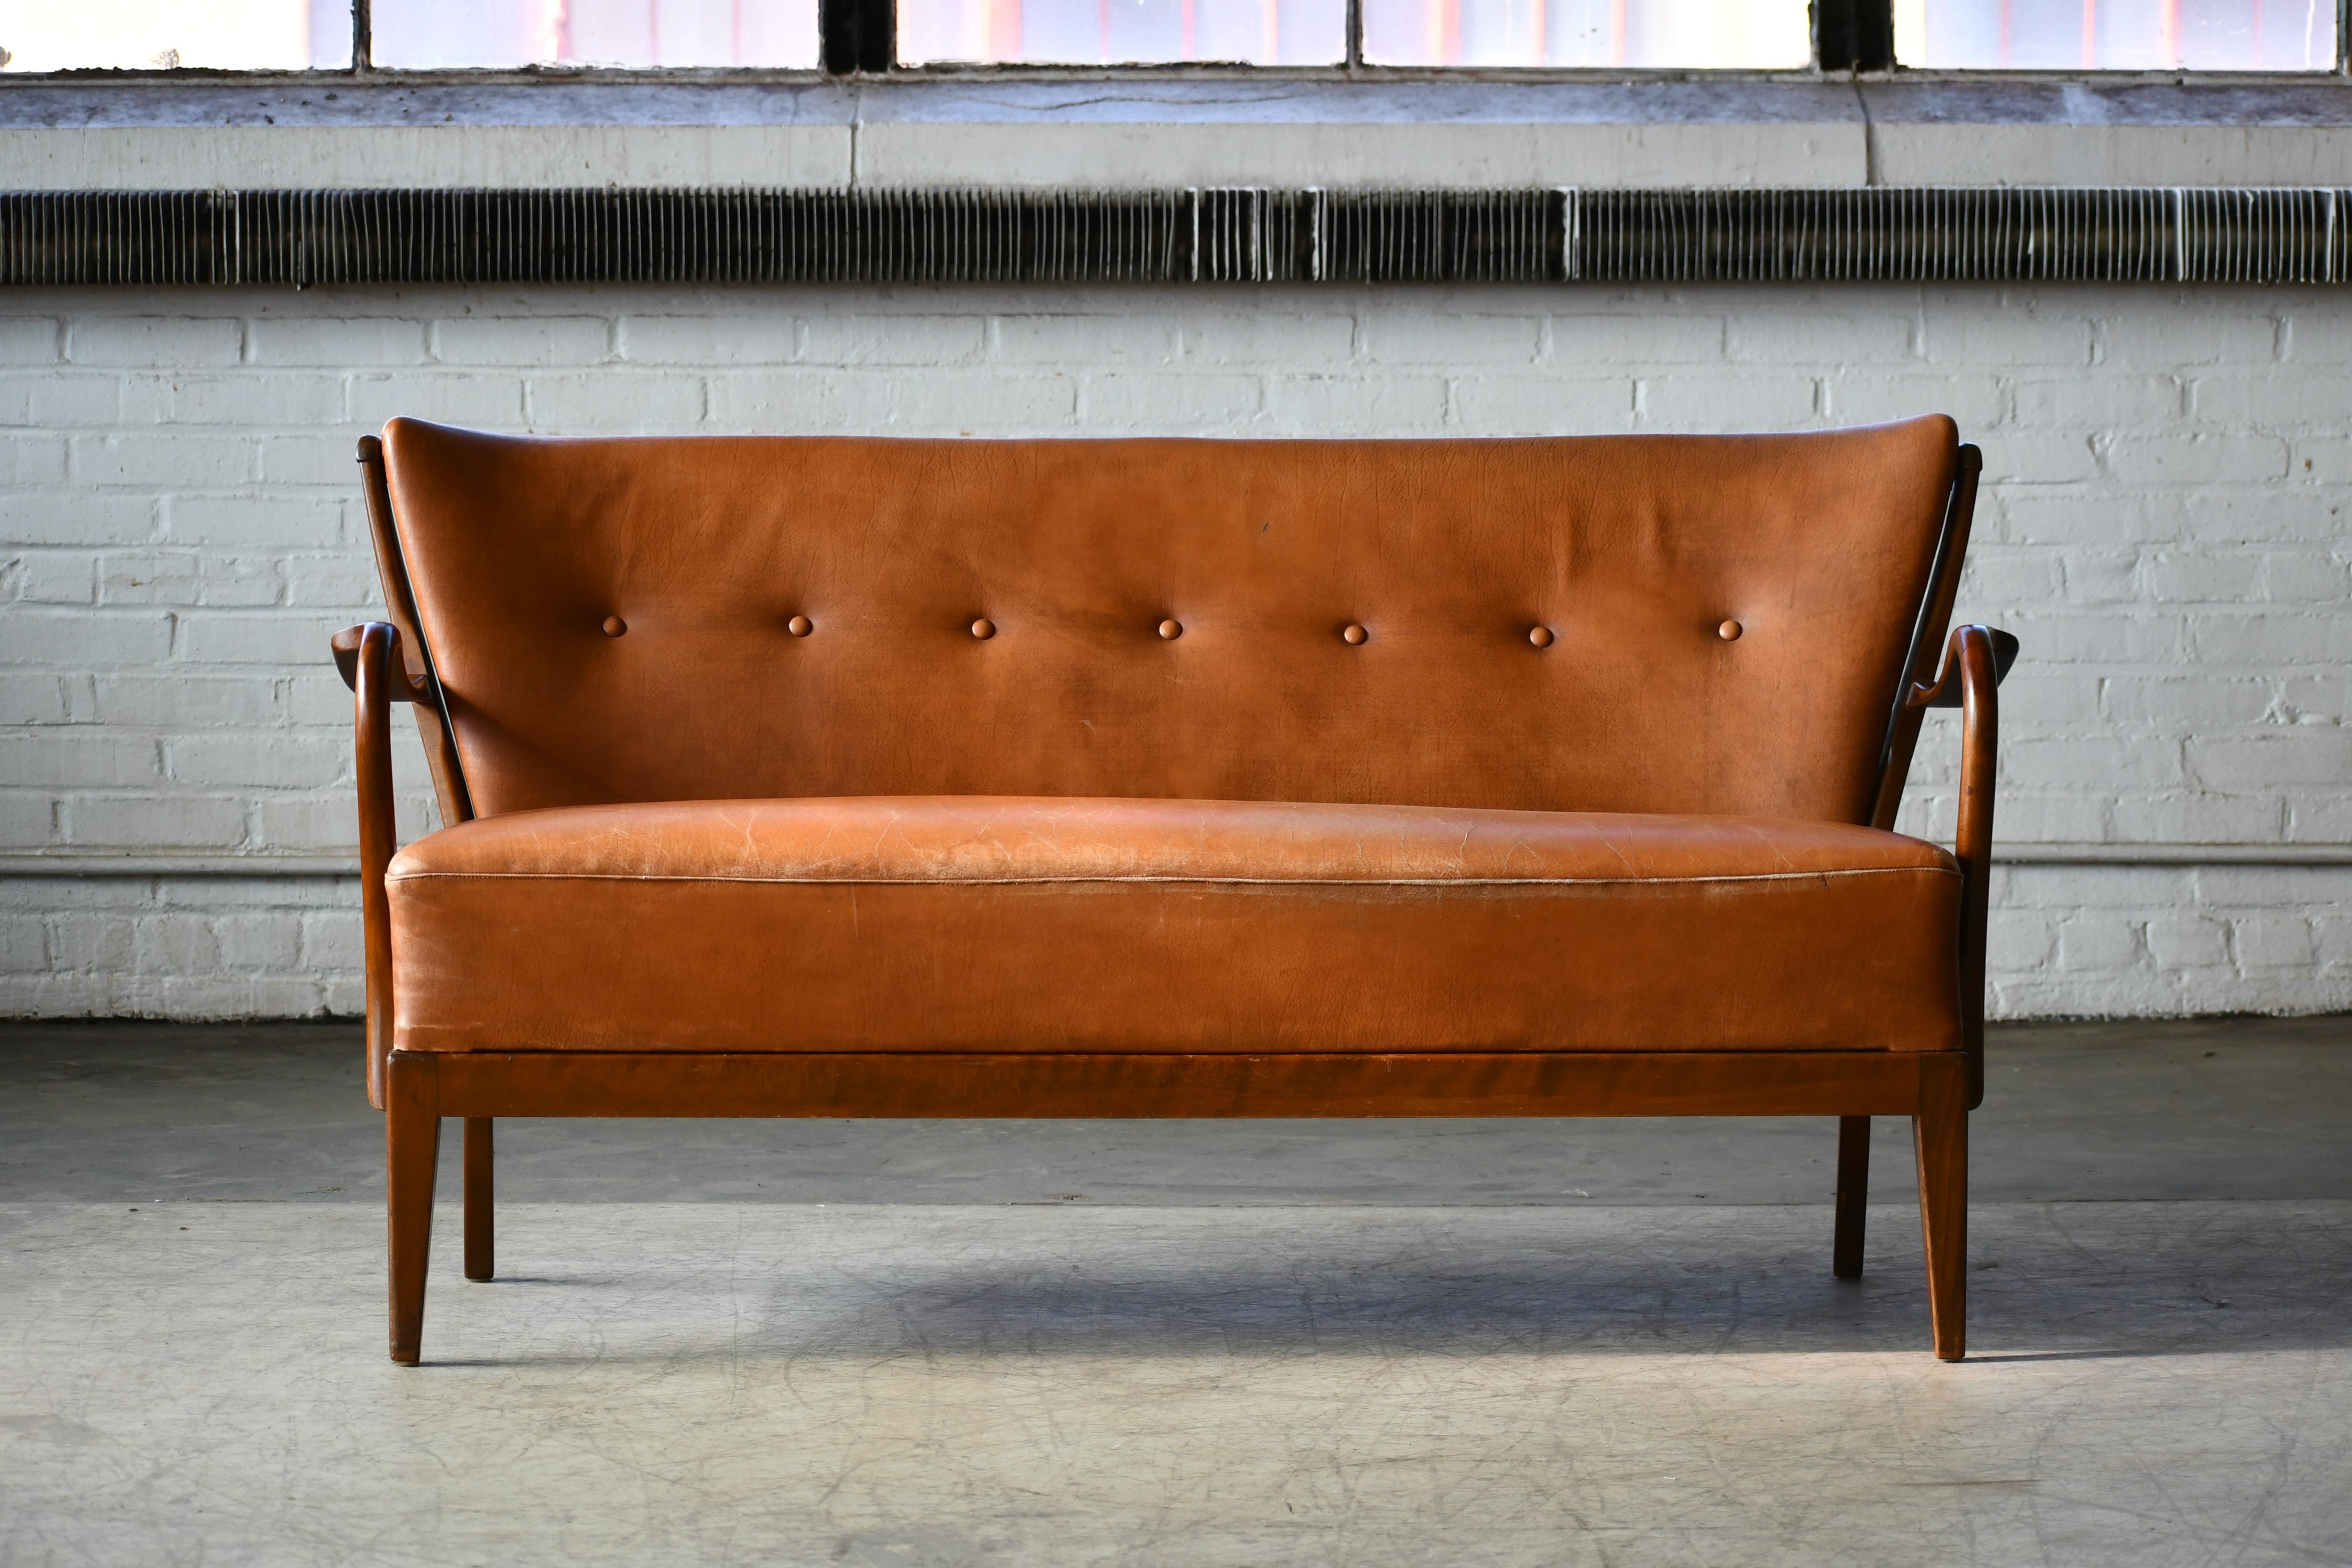 Fantastic 1940s Alfred Christensen designed sofa in his characteristic style of open armrests and spindle back carved from solid beech wood and made by Slagelse Mobelvaerk as model 93 in the 1940s. The sofa was seen in Slagelse's cagalog no. 4401